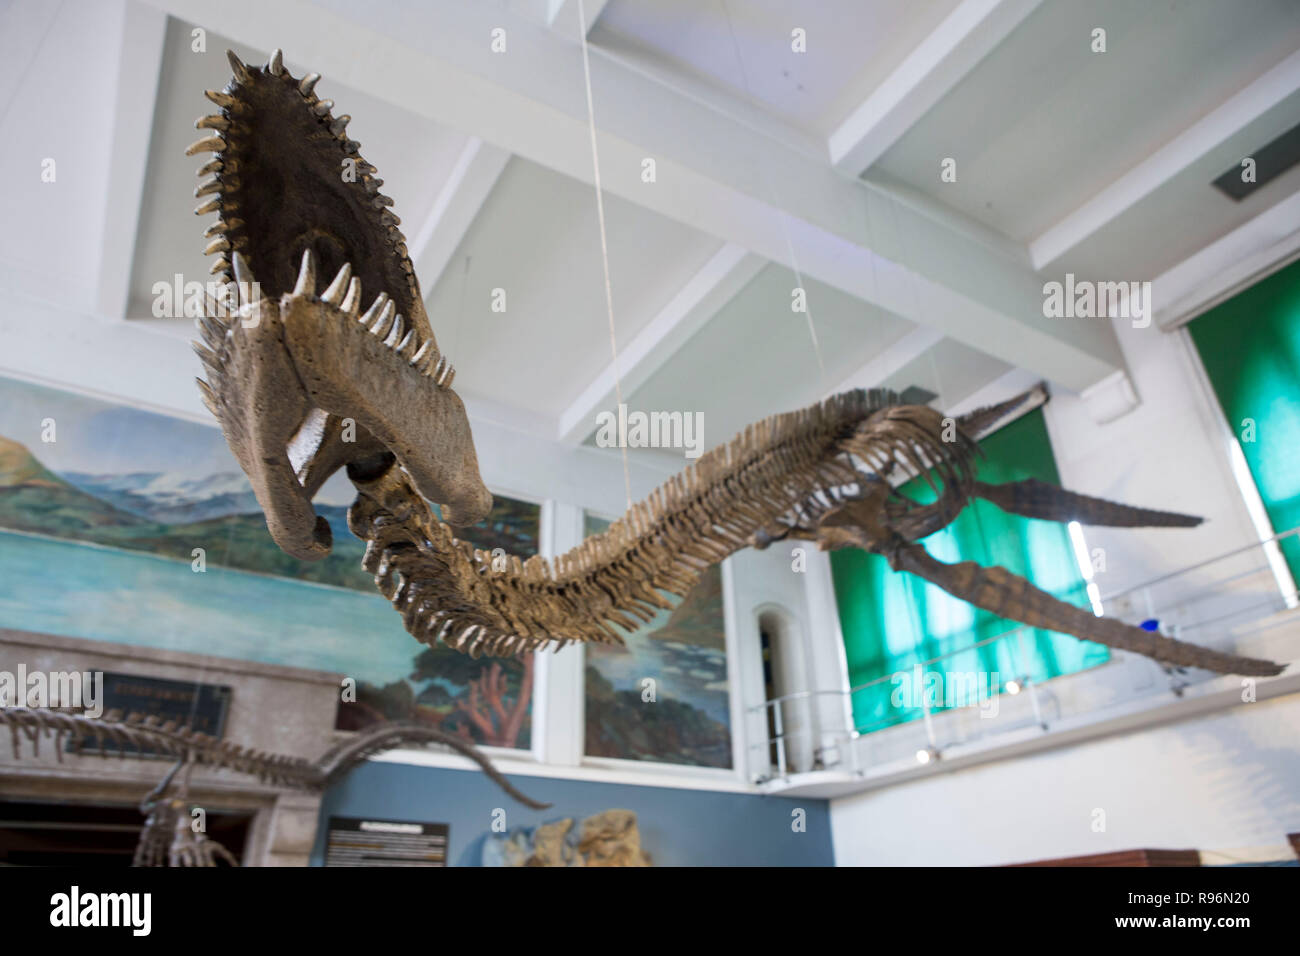 Buenos Aires, Argentina. 19th Dec, 2018. Replica of a 65-million-year-old skeleton of a plesiosaur marine reptile is displayed in the museum hall at the Bernardino Rivadavia Natural Science Museum in Buenos Aires, Argentina, on Dec. 19, 2018. The fossil is found in Cretaceous period rocks submerged in Lake Argentino at the foot of the Andes mountains. The fossil is nine meters long with each fin measuring 1.3 meters. Credit: Martin Zabala/Xinhua/Alamy Live News Stock Photo